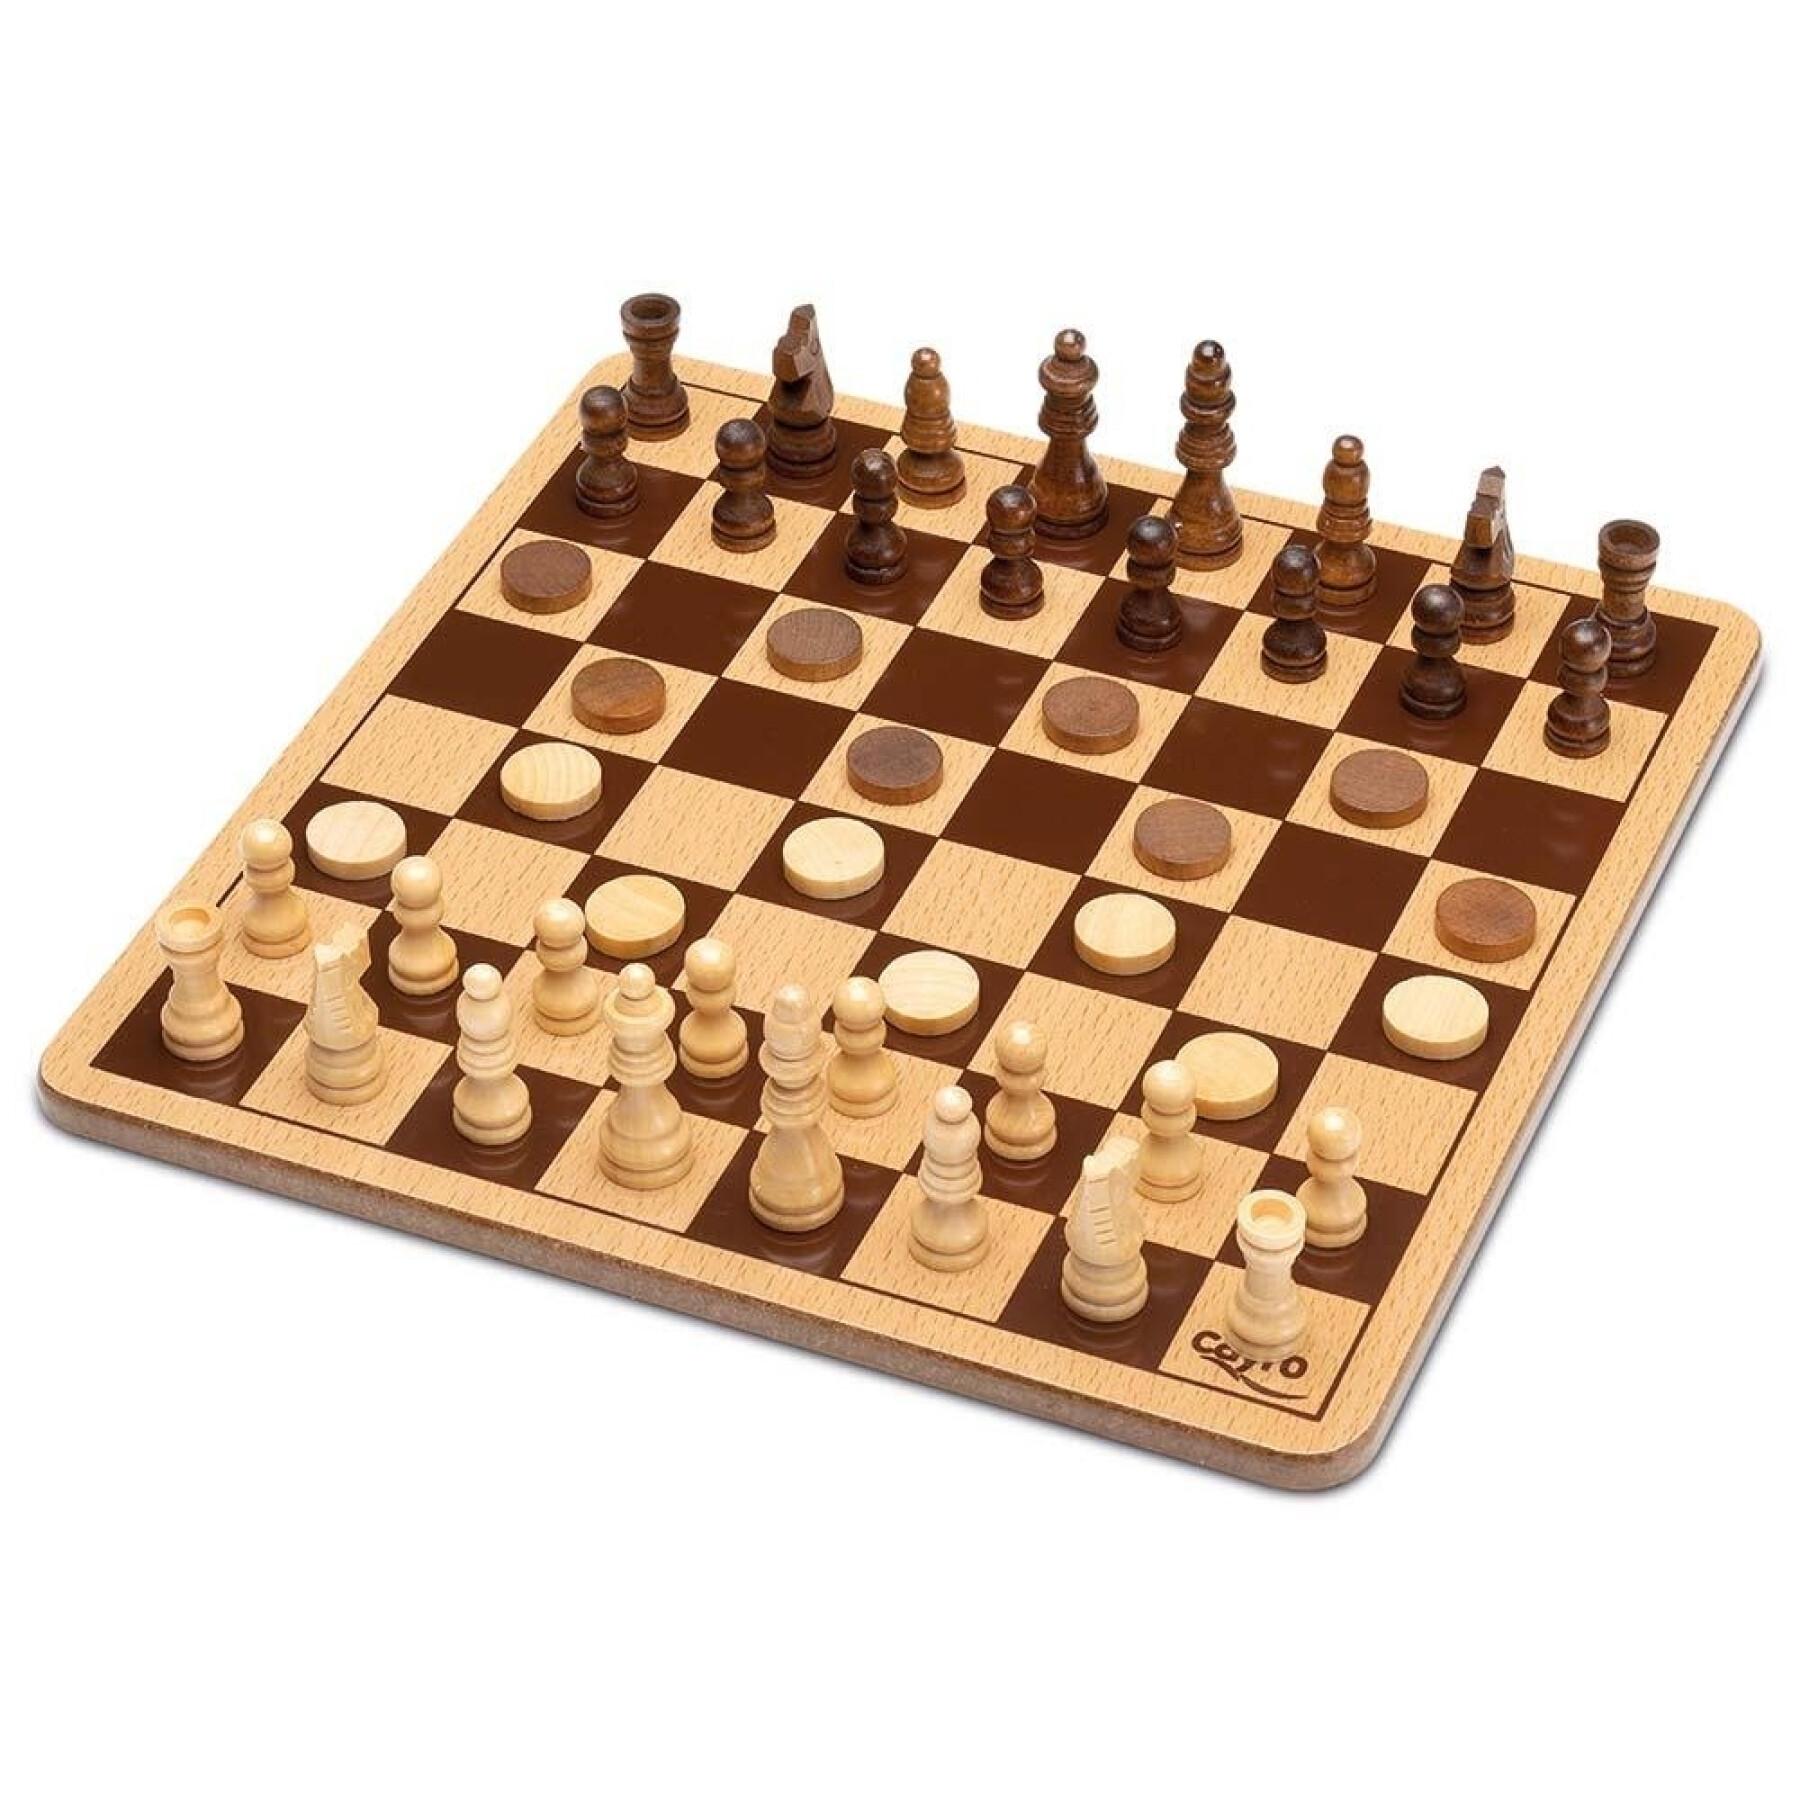 Wooden chess set in a metal box Cayro